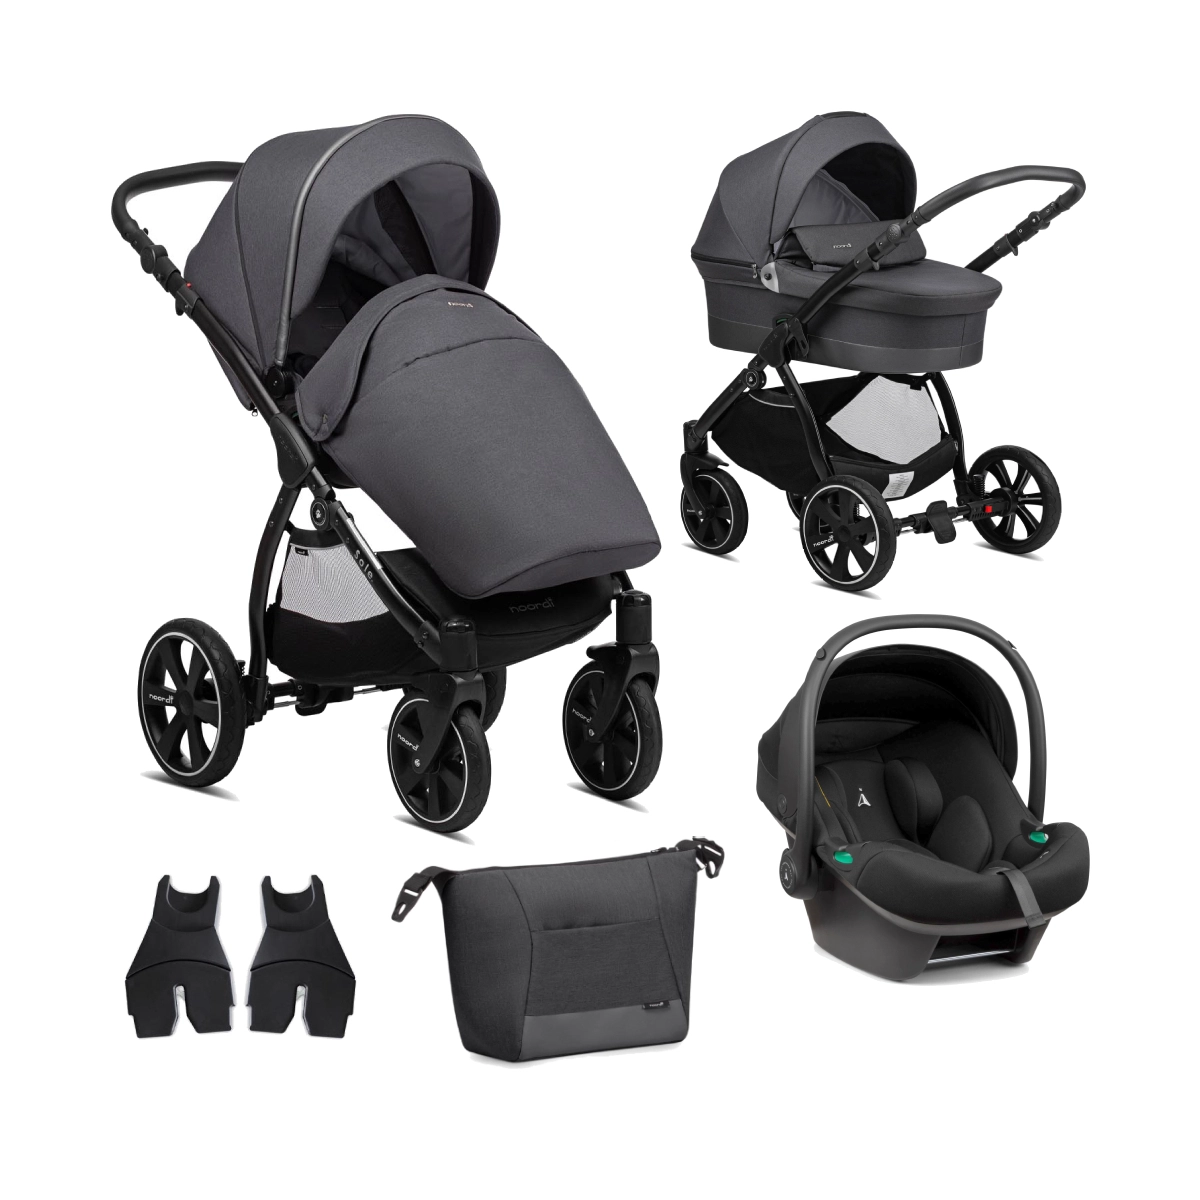 Noordi Sole Go 3in1 Travel System with Terra i-Size Car Seat